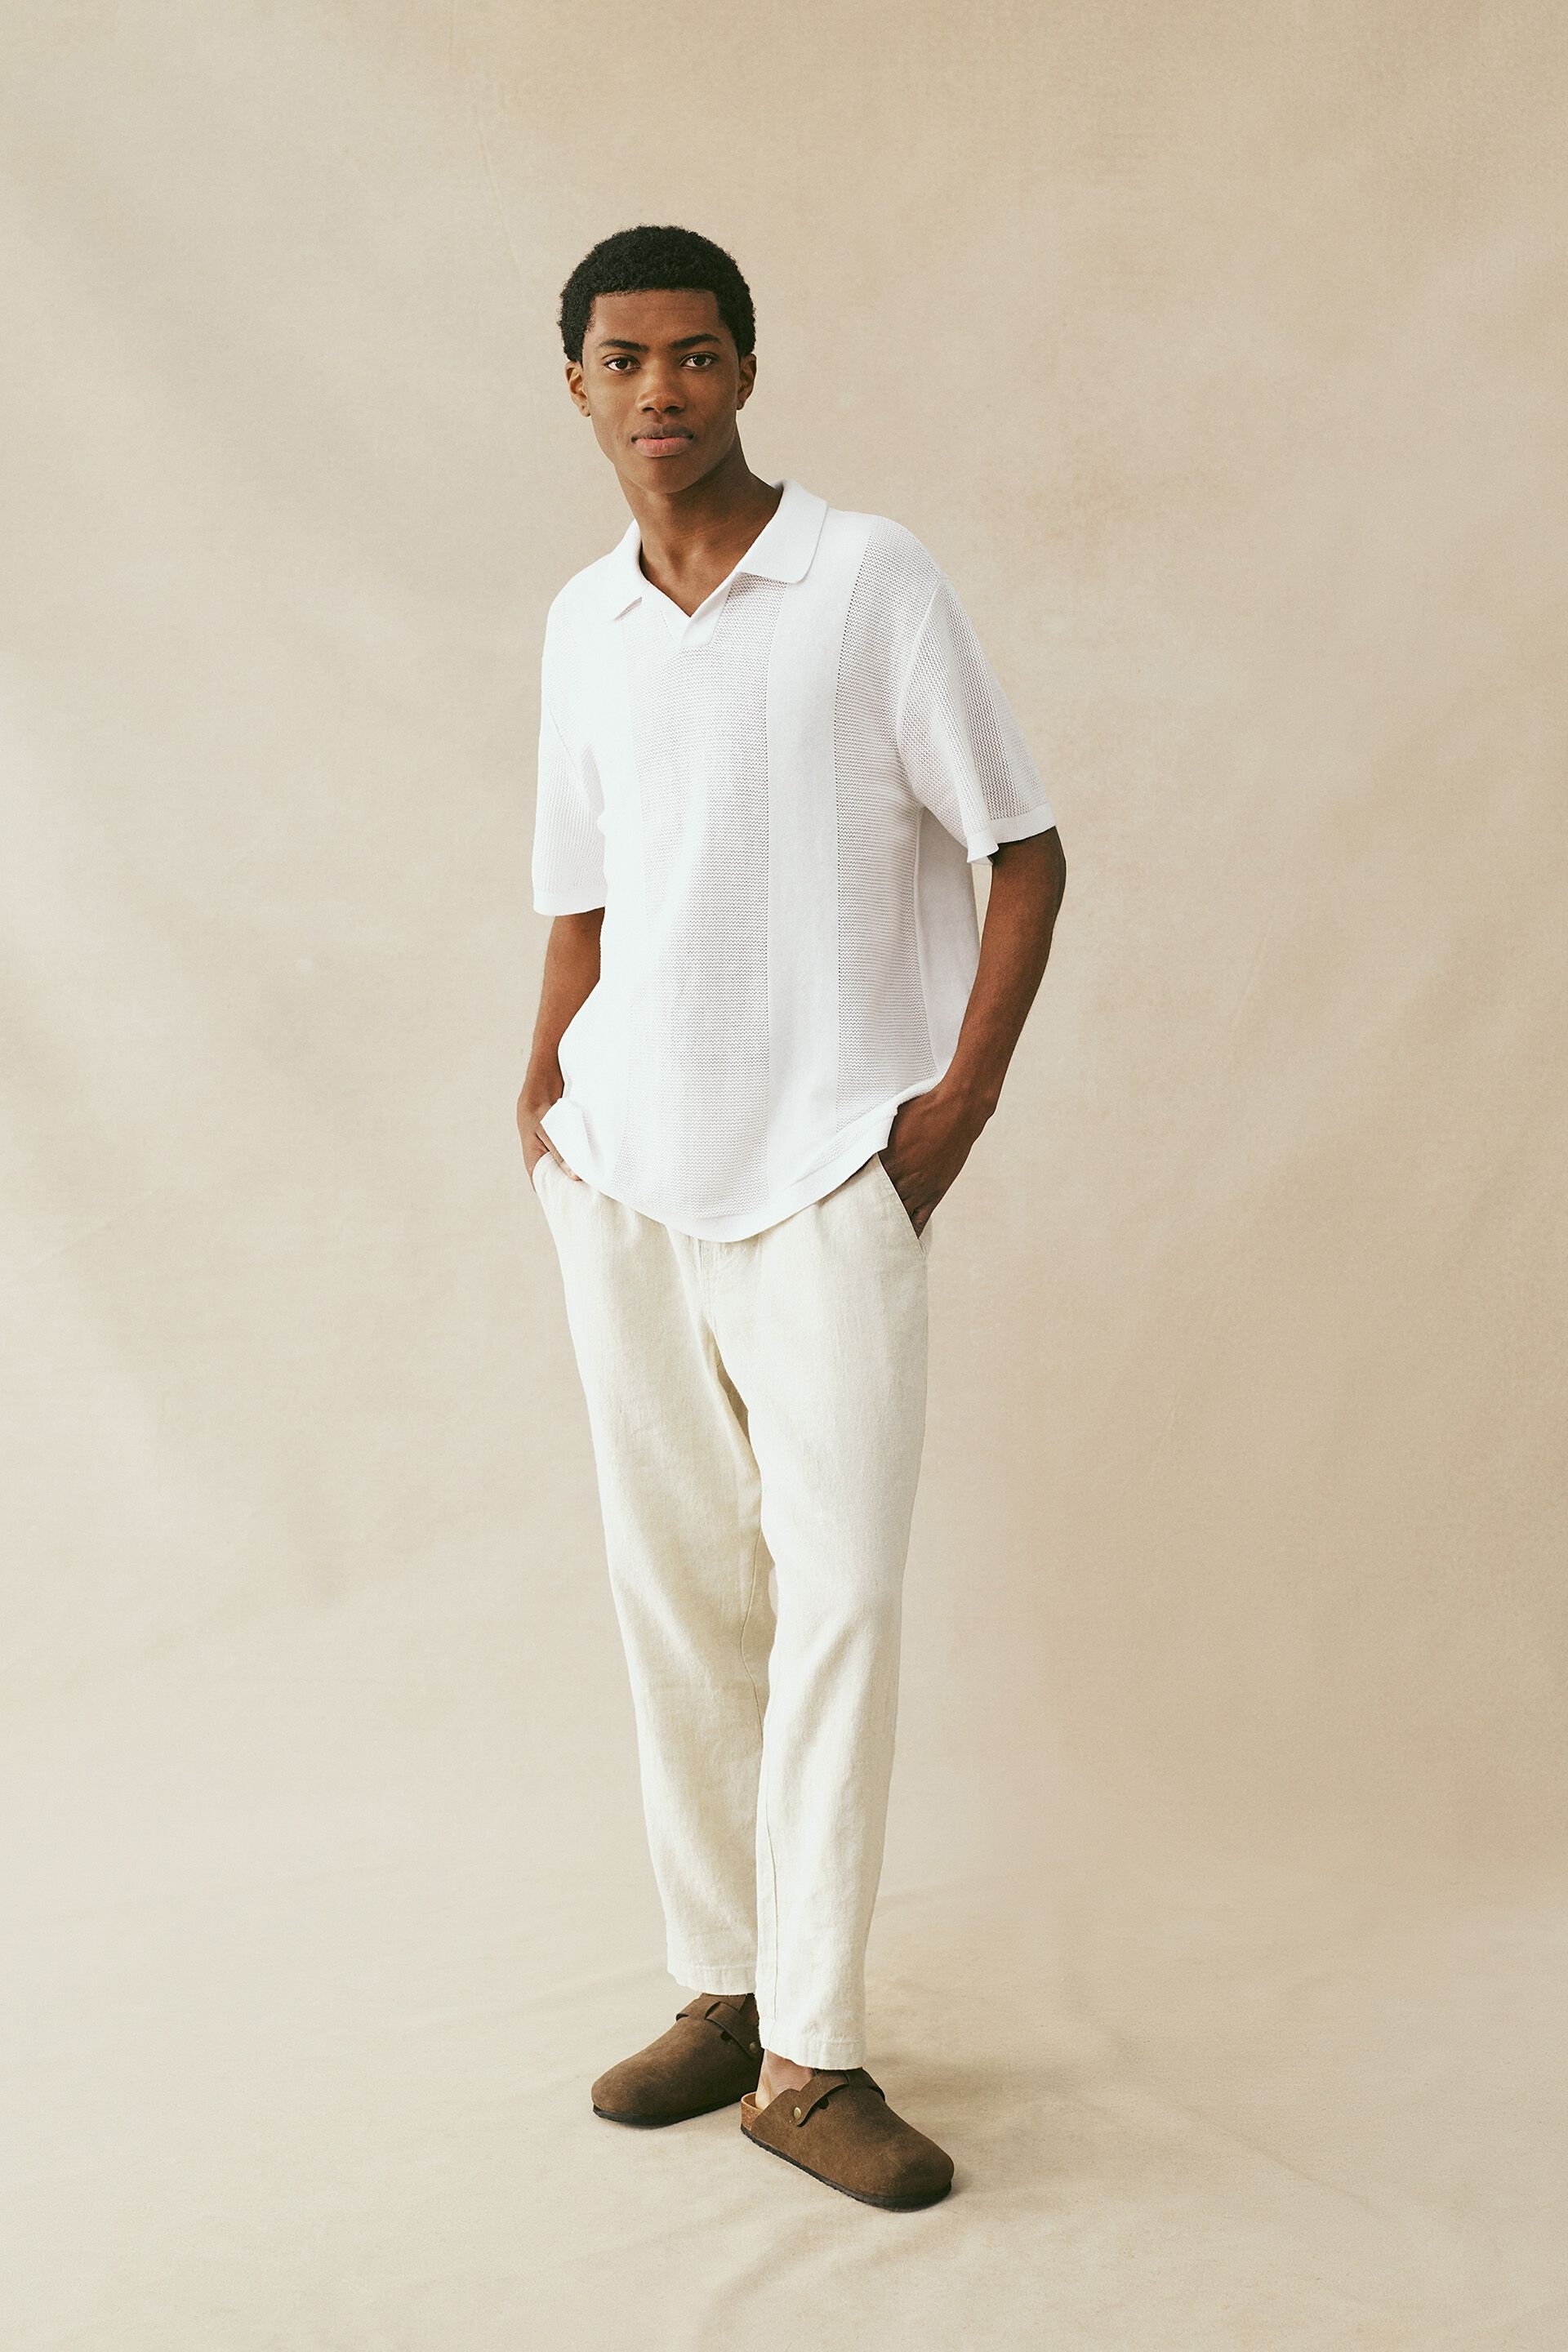 Best White Linen Pants for Women: Versatile and Airy for a Beach Vacay